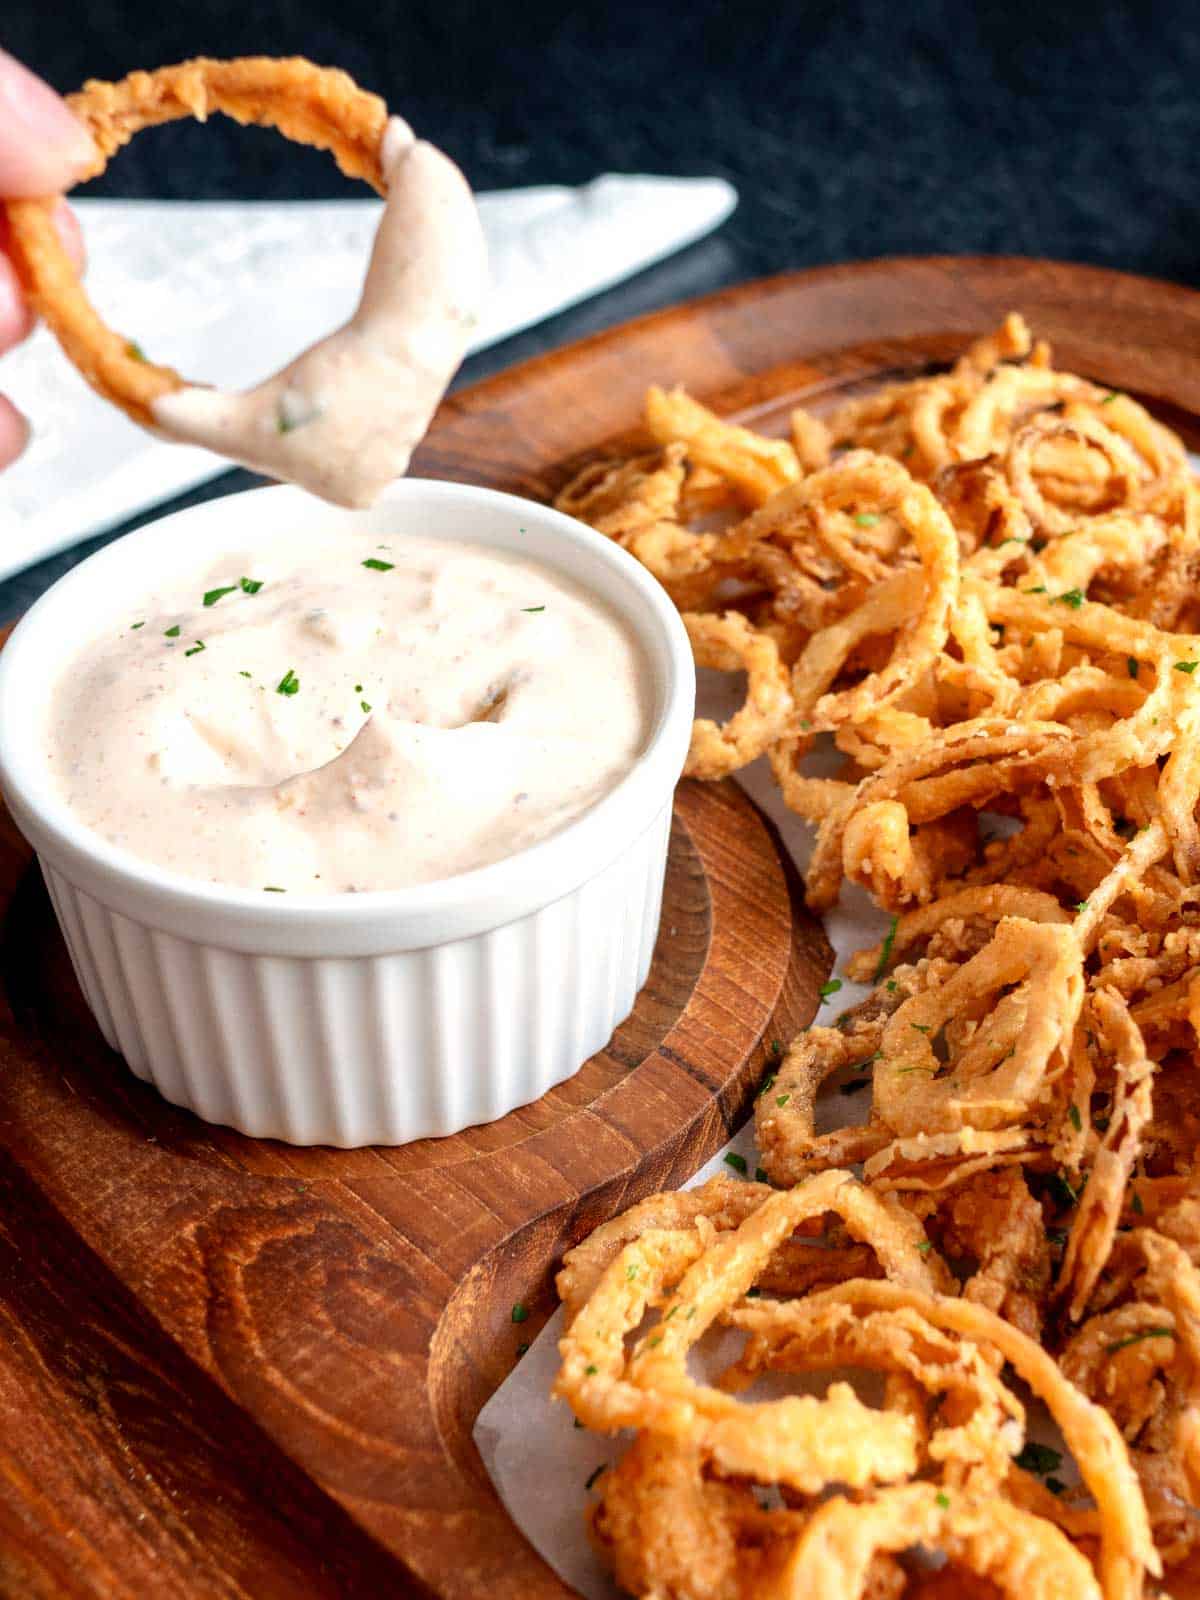 Cajun onion strings with spicy dipping sauce.